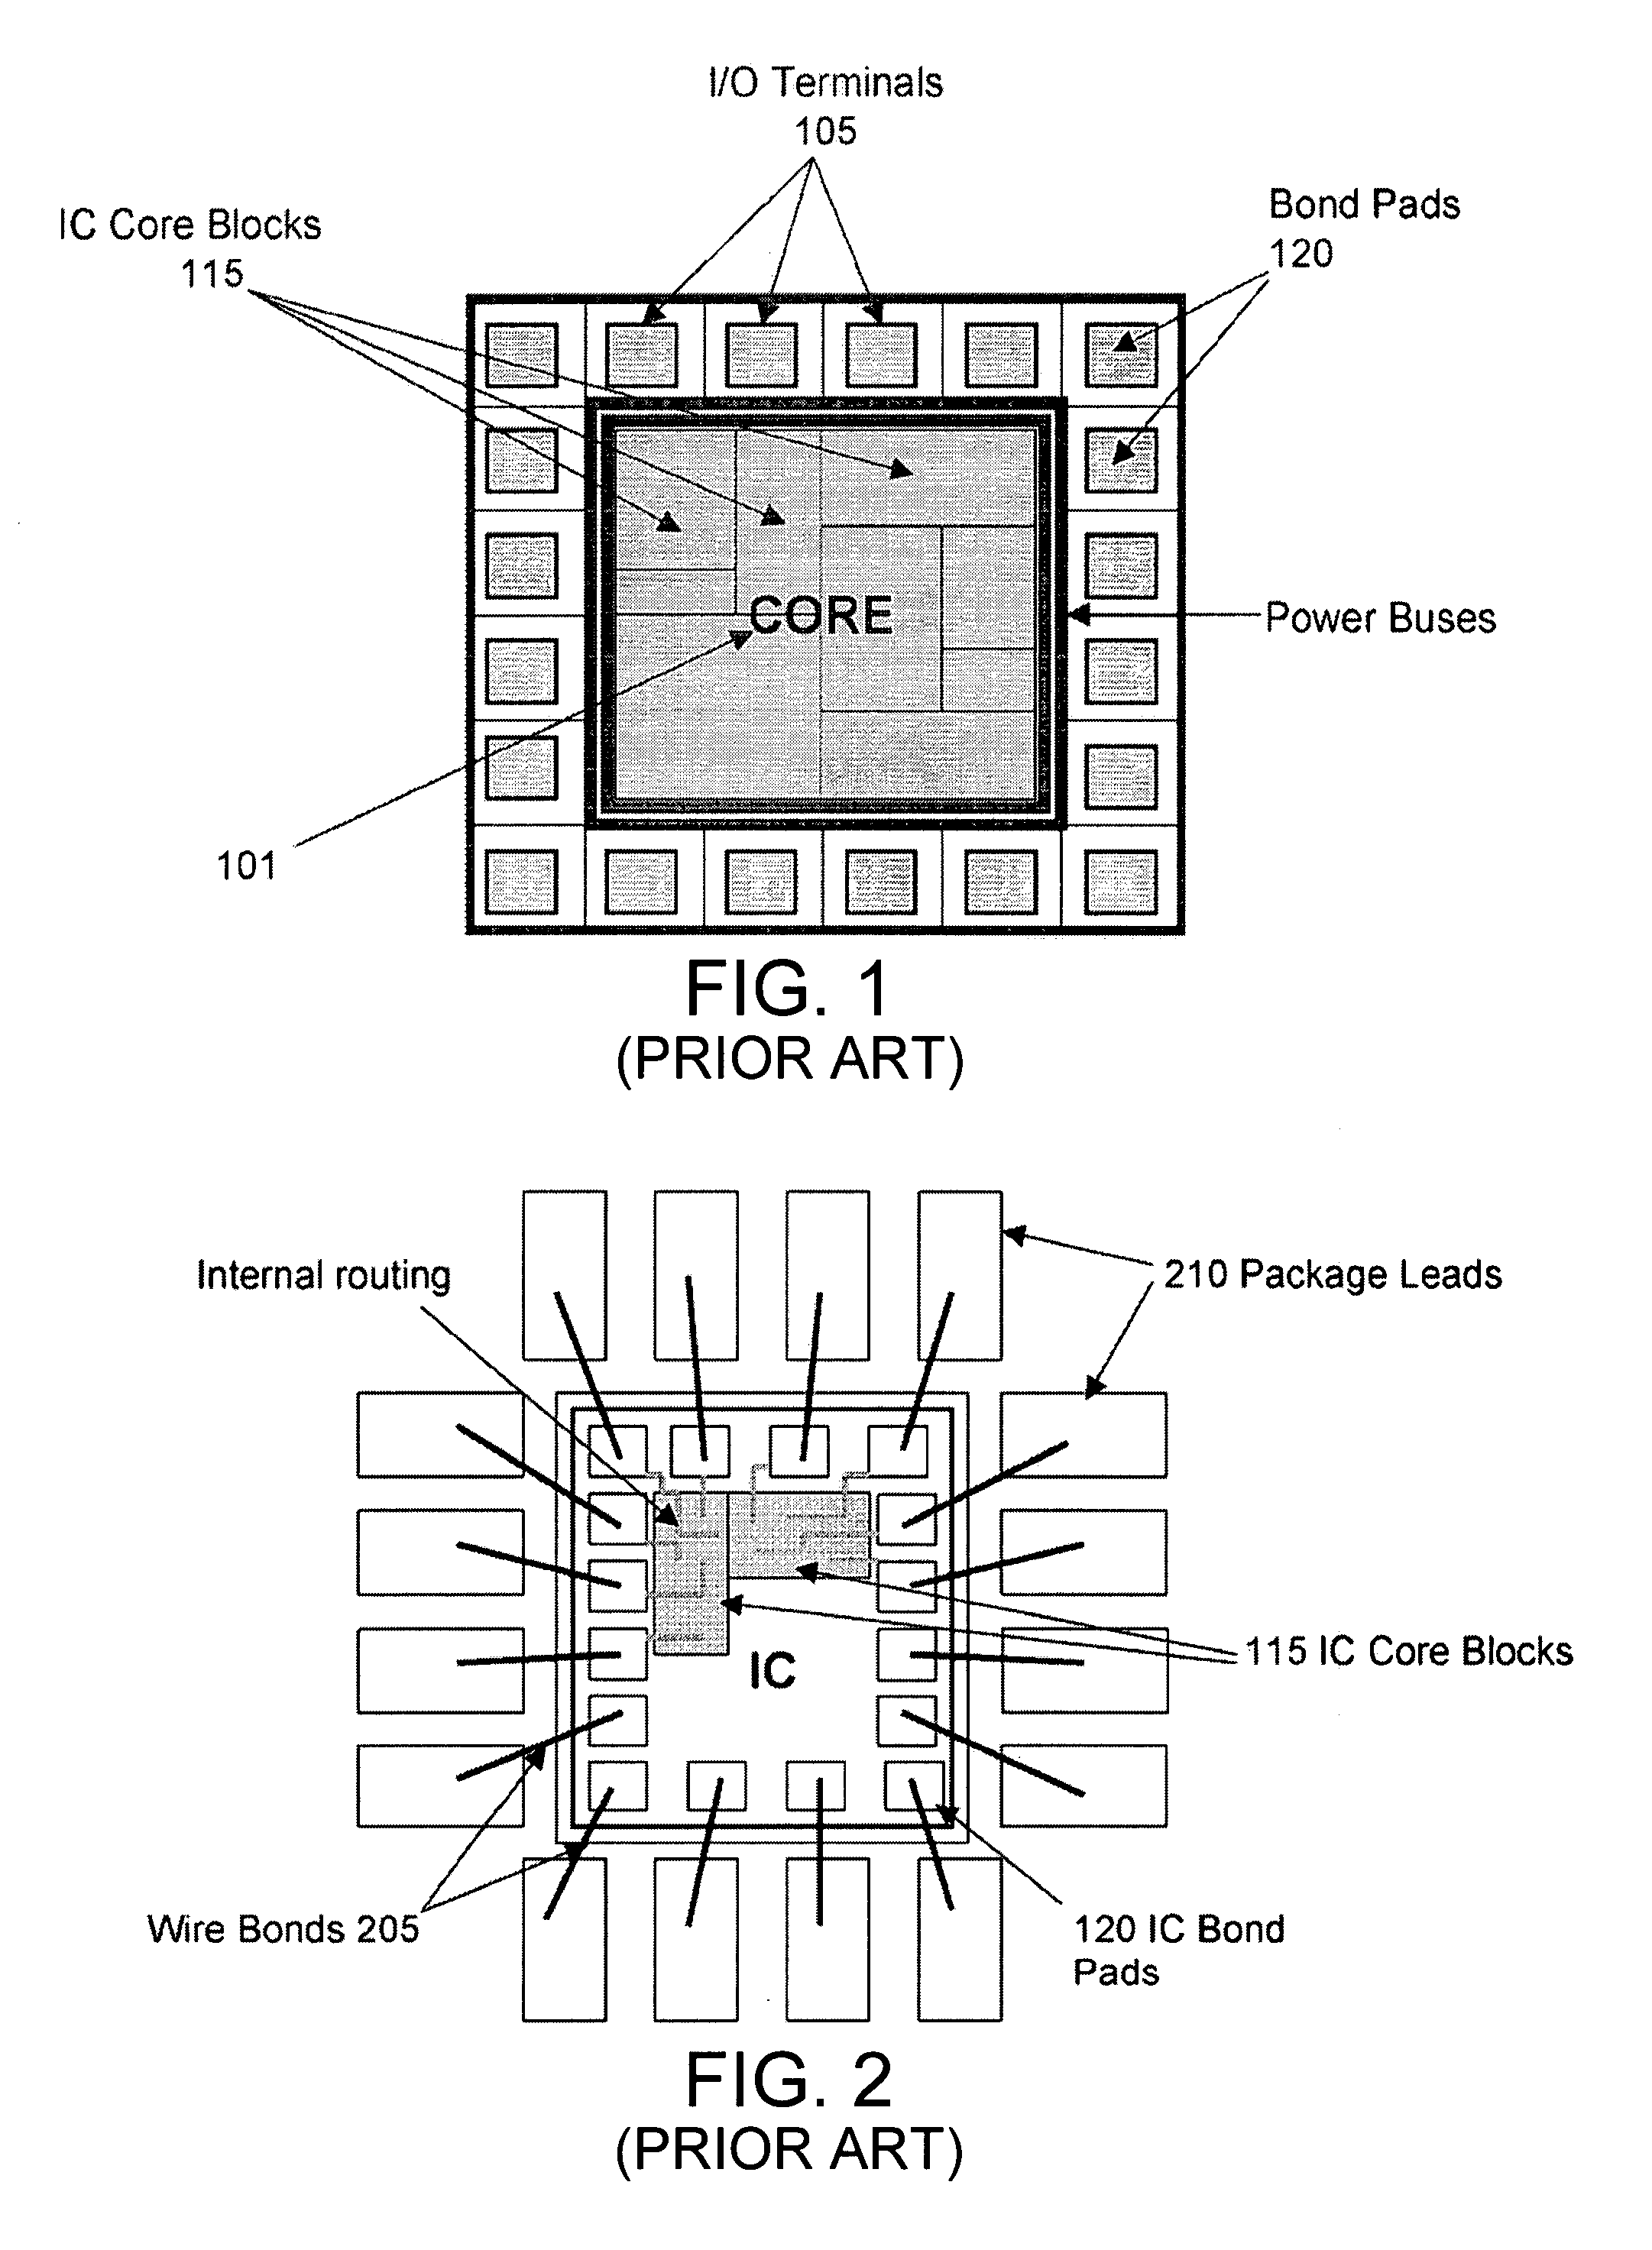 Interconnect layer of a modularly designed analog integrated circuit